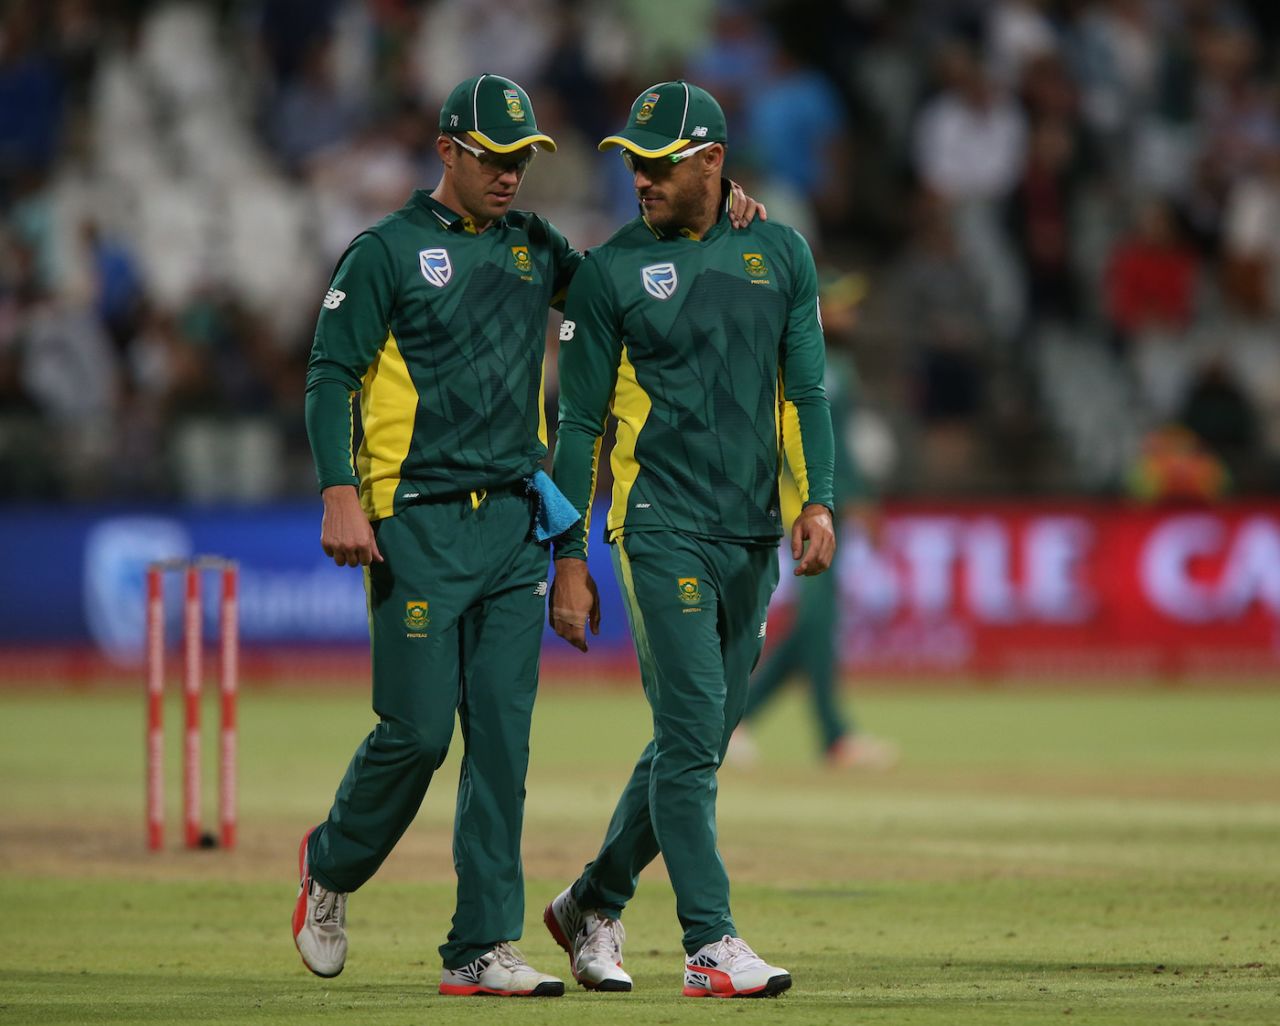 Faf du Plessis and AB de Villiers chat, South Africa v Sri Lanka, 4th ODI, Cape Town, February 7, 2017